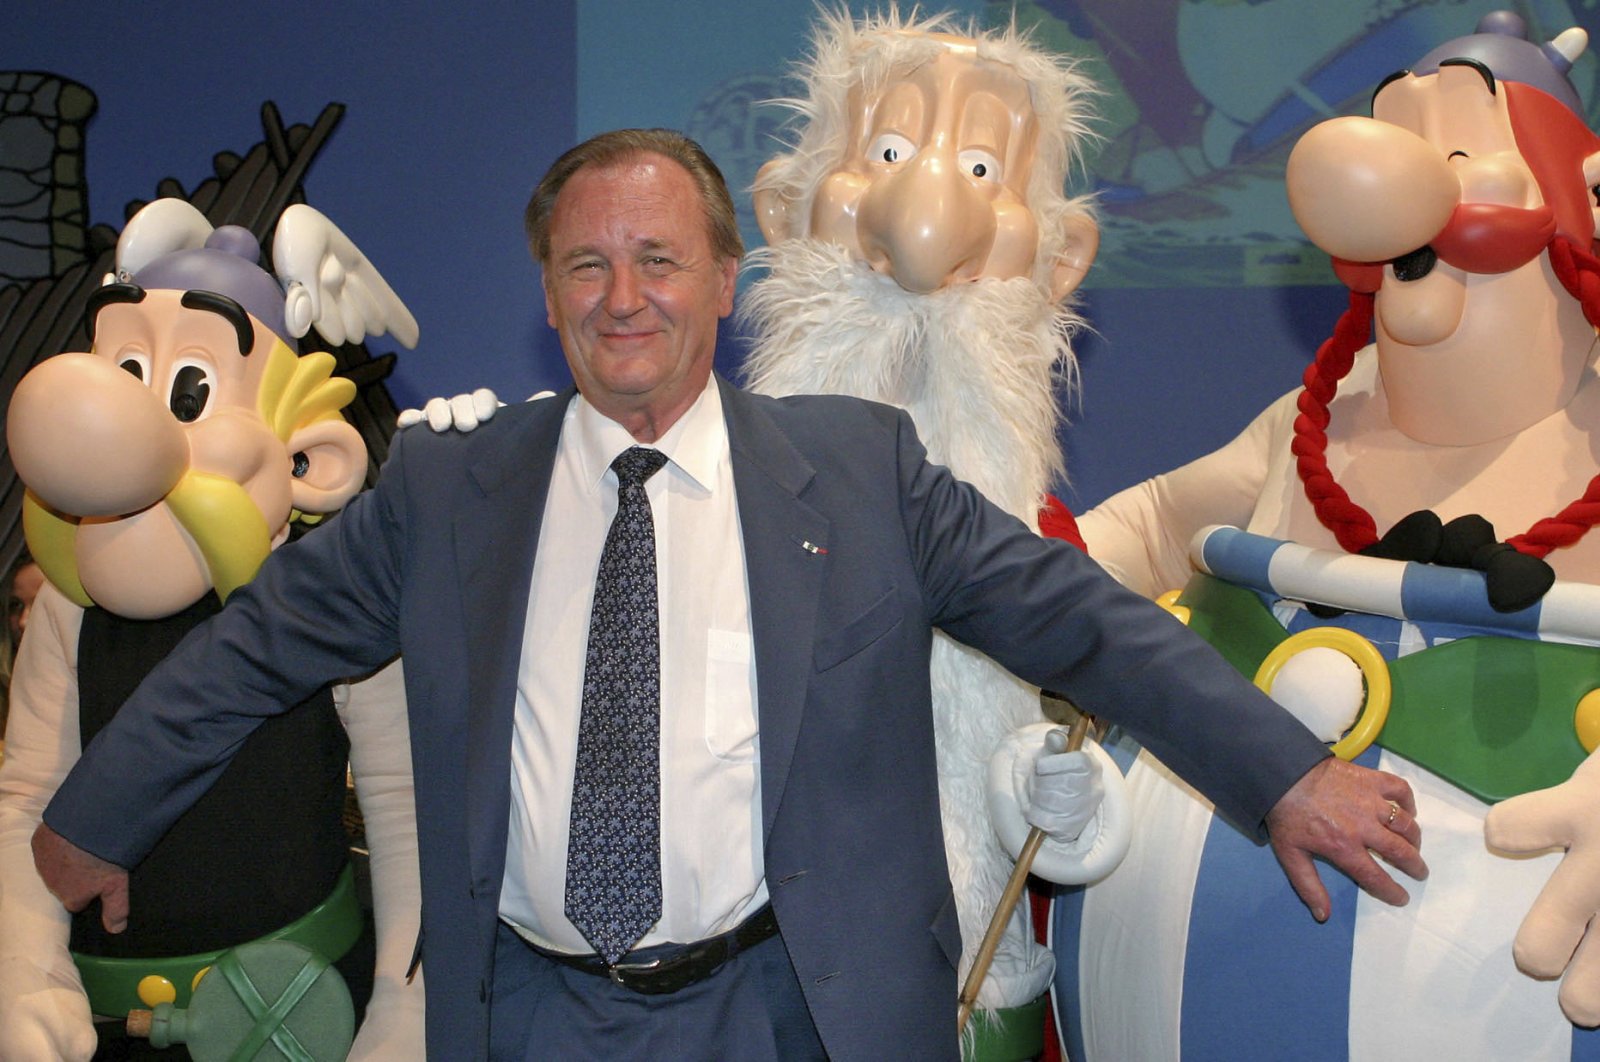 In this June 12, 2004 file photo, French illustrator Albert Uderzo poses with characters of his famous comics, Asterix, left, druid Miraculix, behind, and Obelix , right, during the awarding of the so-called "Max & Moritz" award by the Erlangen Comic Salon2004 in Erlangen, southern Germany. (AP Photo)